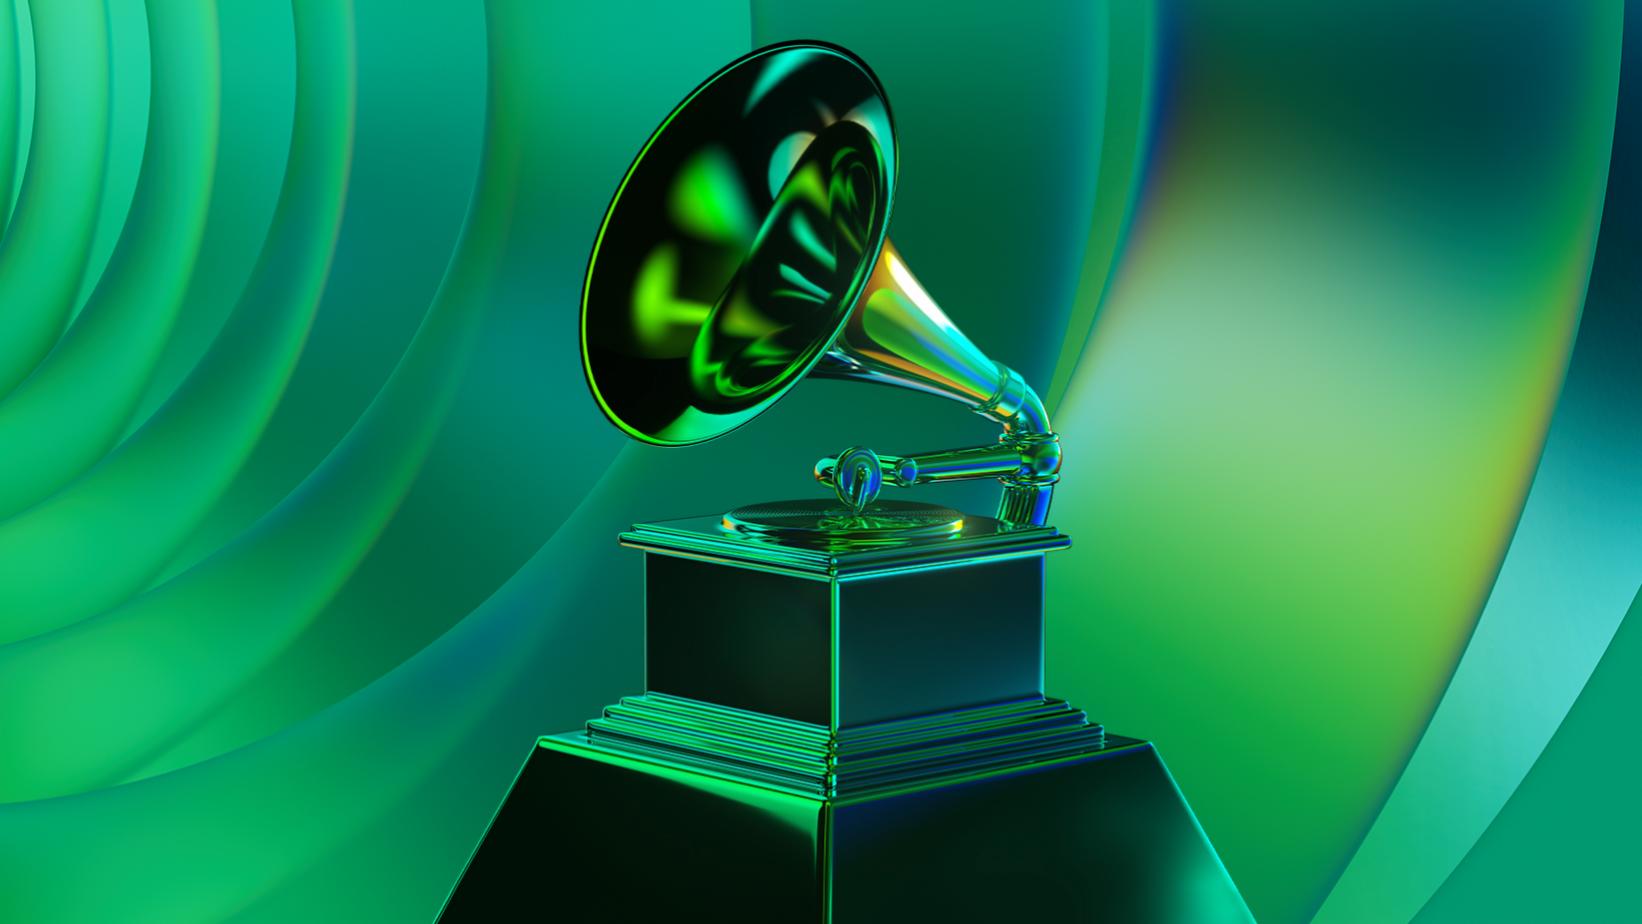 Grammy Awards called off owing to Covid-19 surge